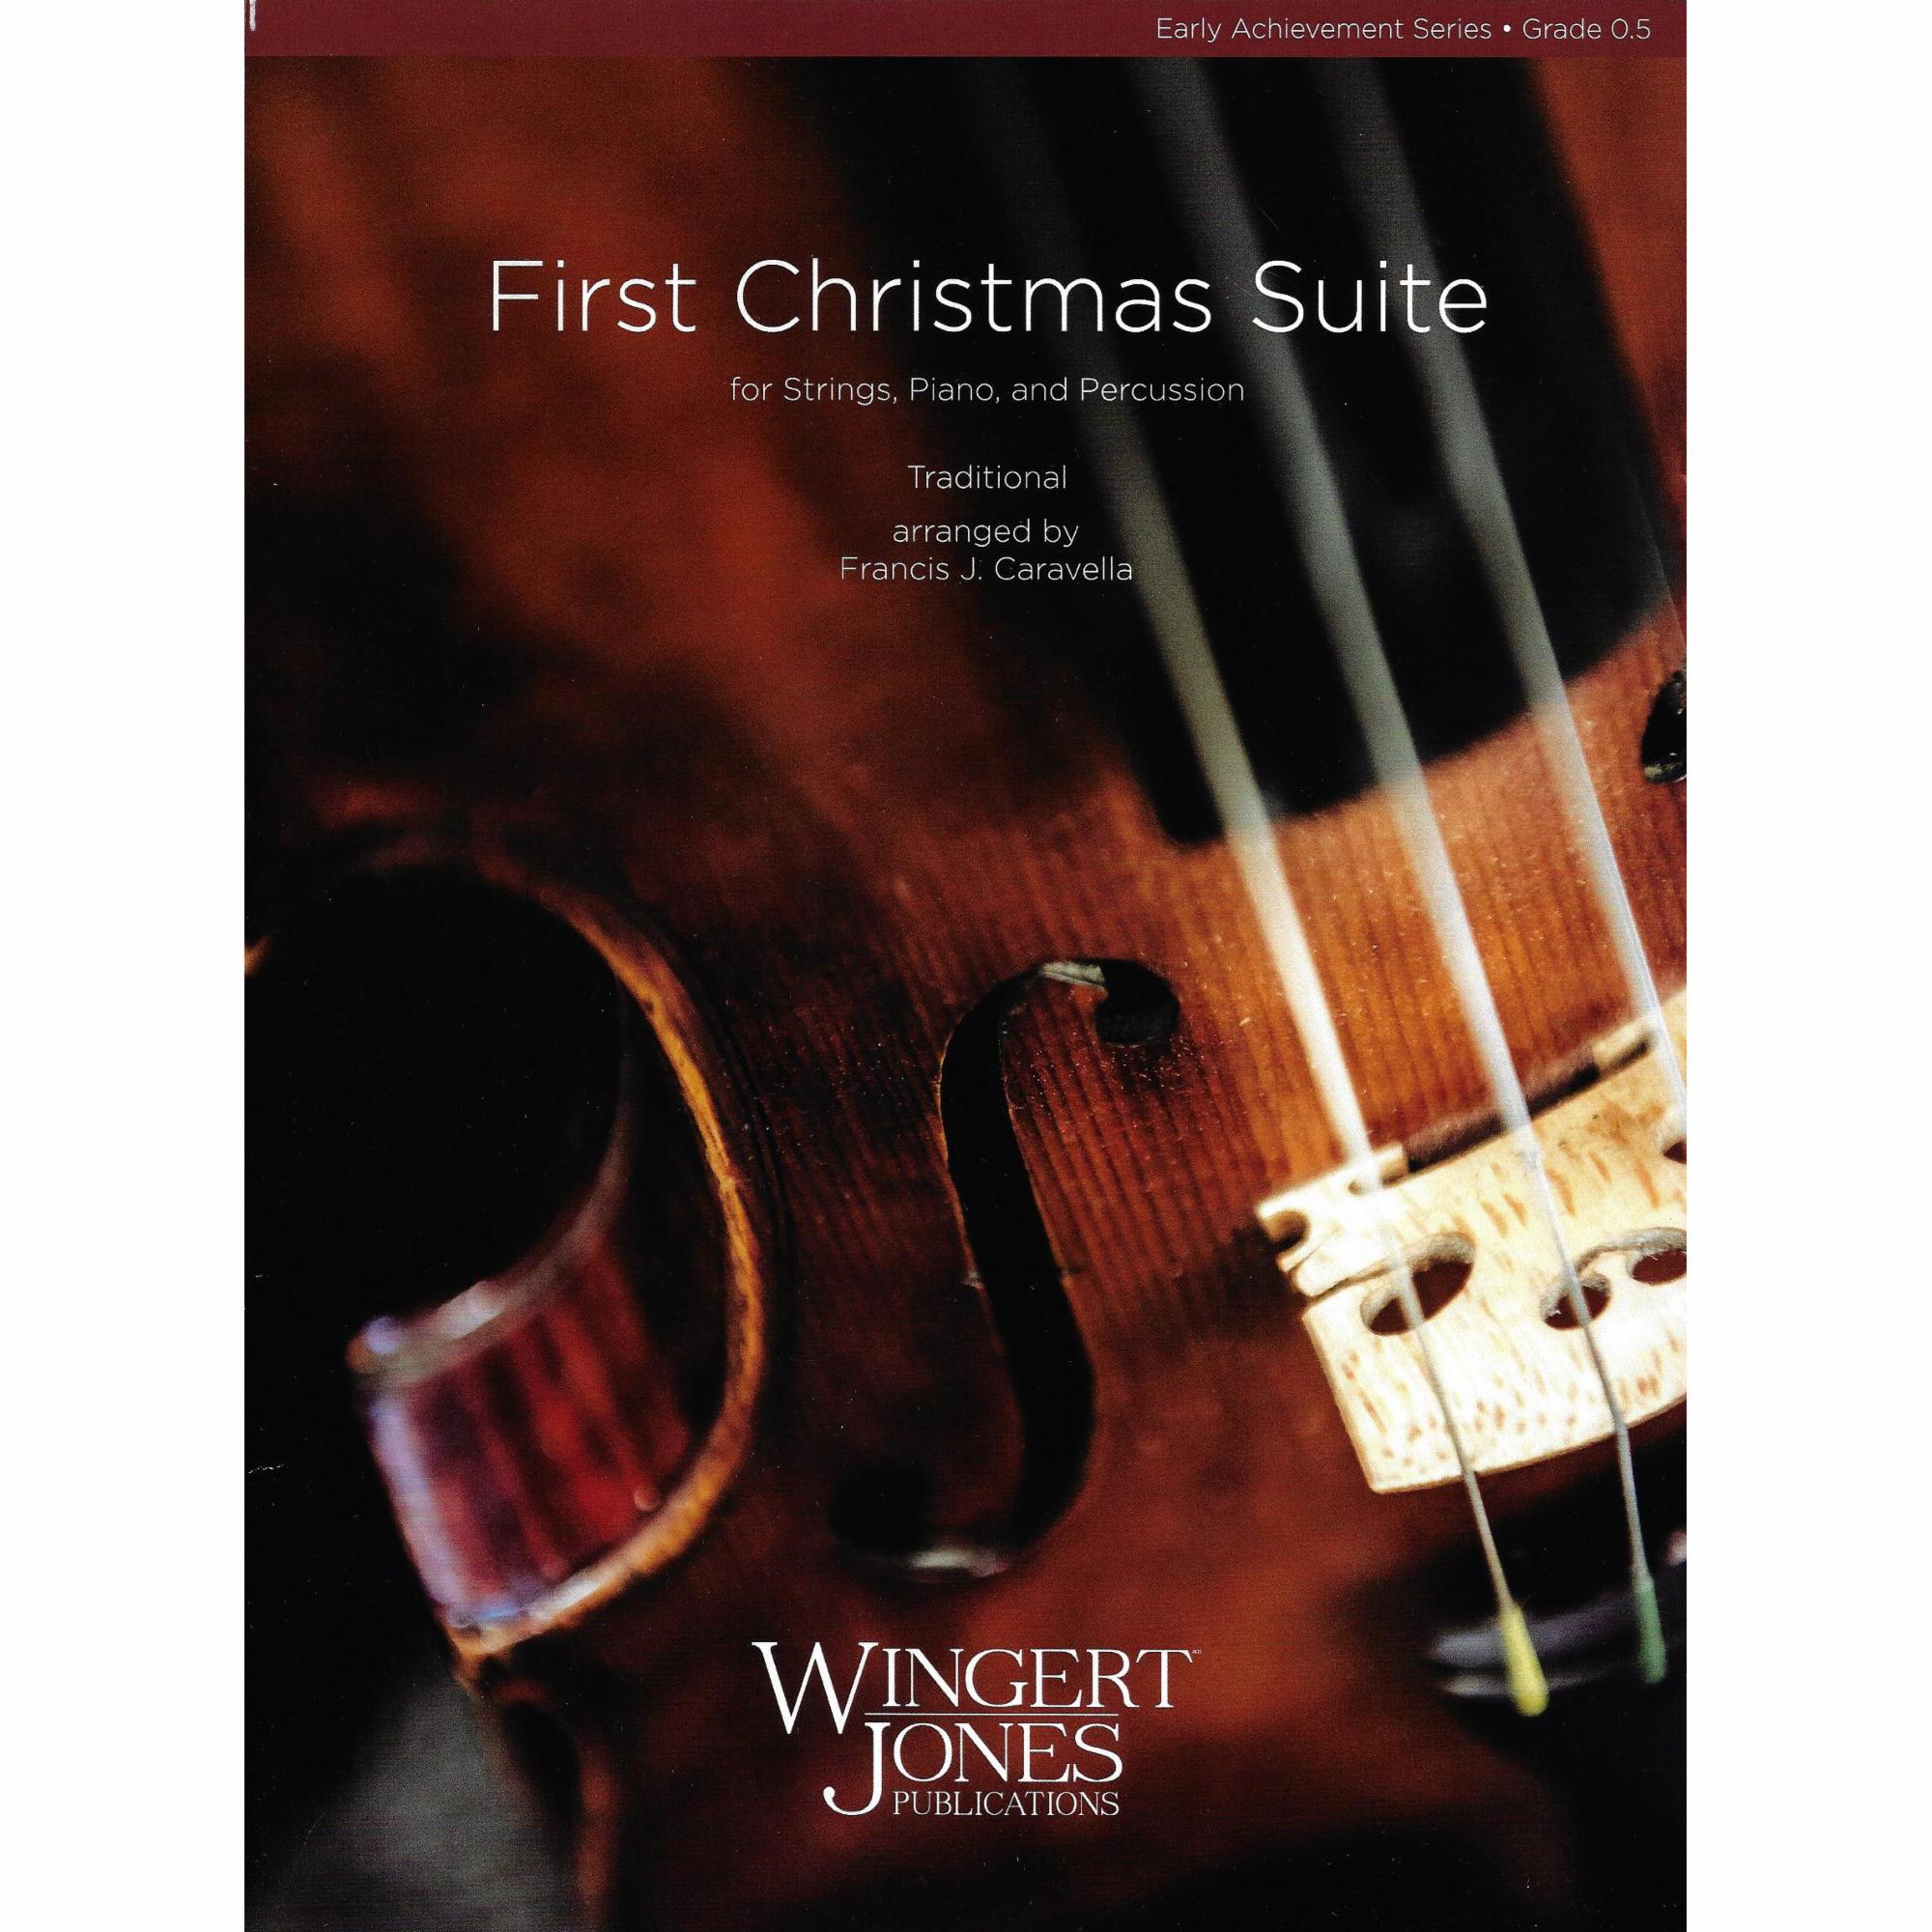 First Christmas Suite for Strings, Piano, and Percussion